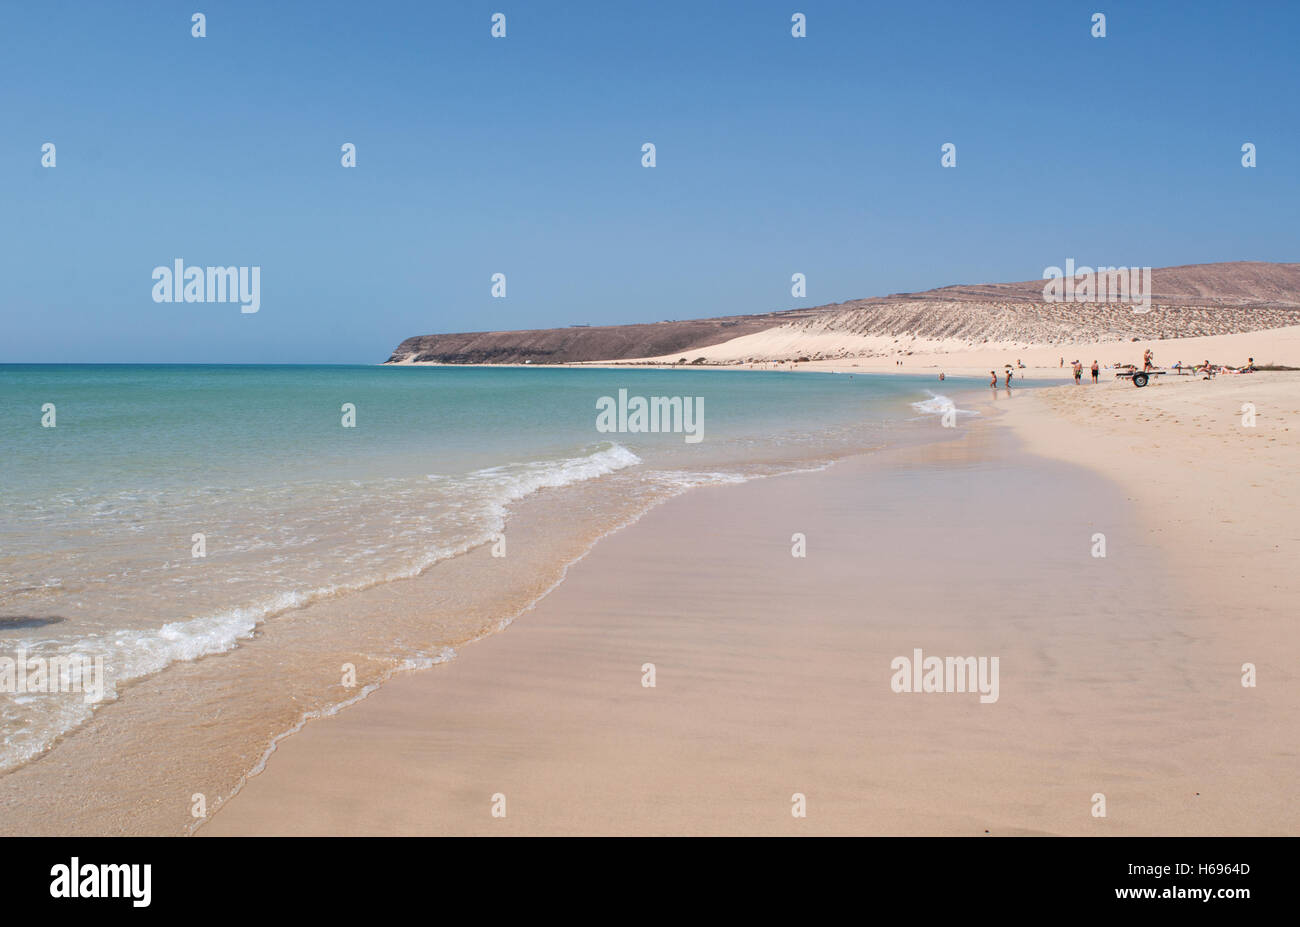 Fuerteventura, Canary Islands: the crystal clear water and panoramic view of the beach Playa de Jandia, one of the most famous of the island Stock Photo